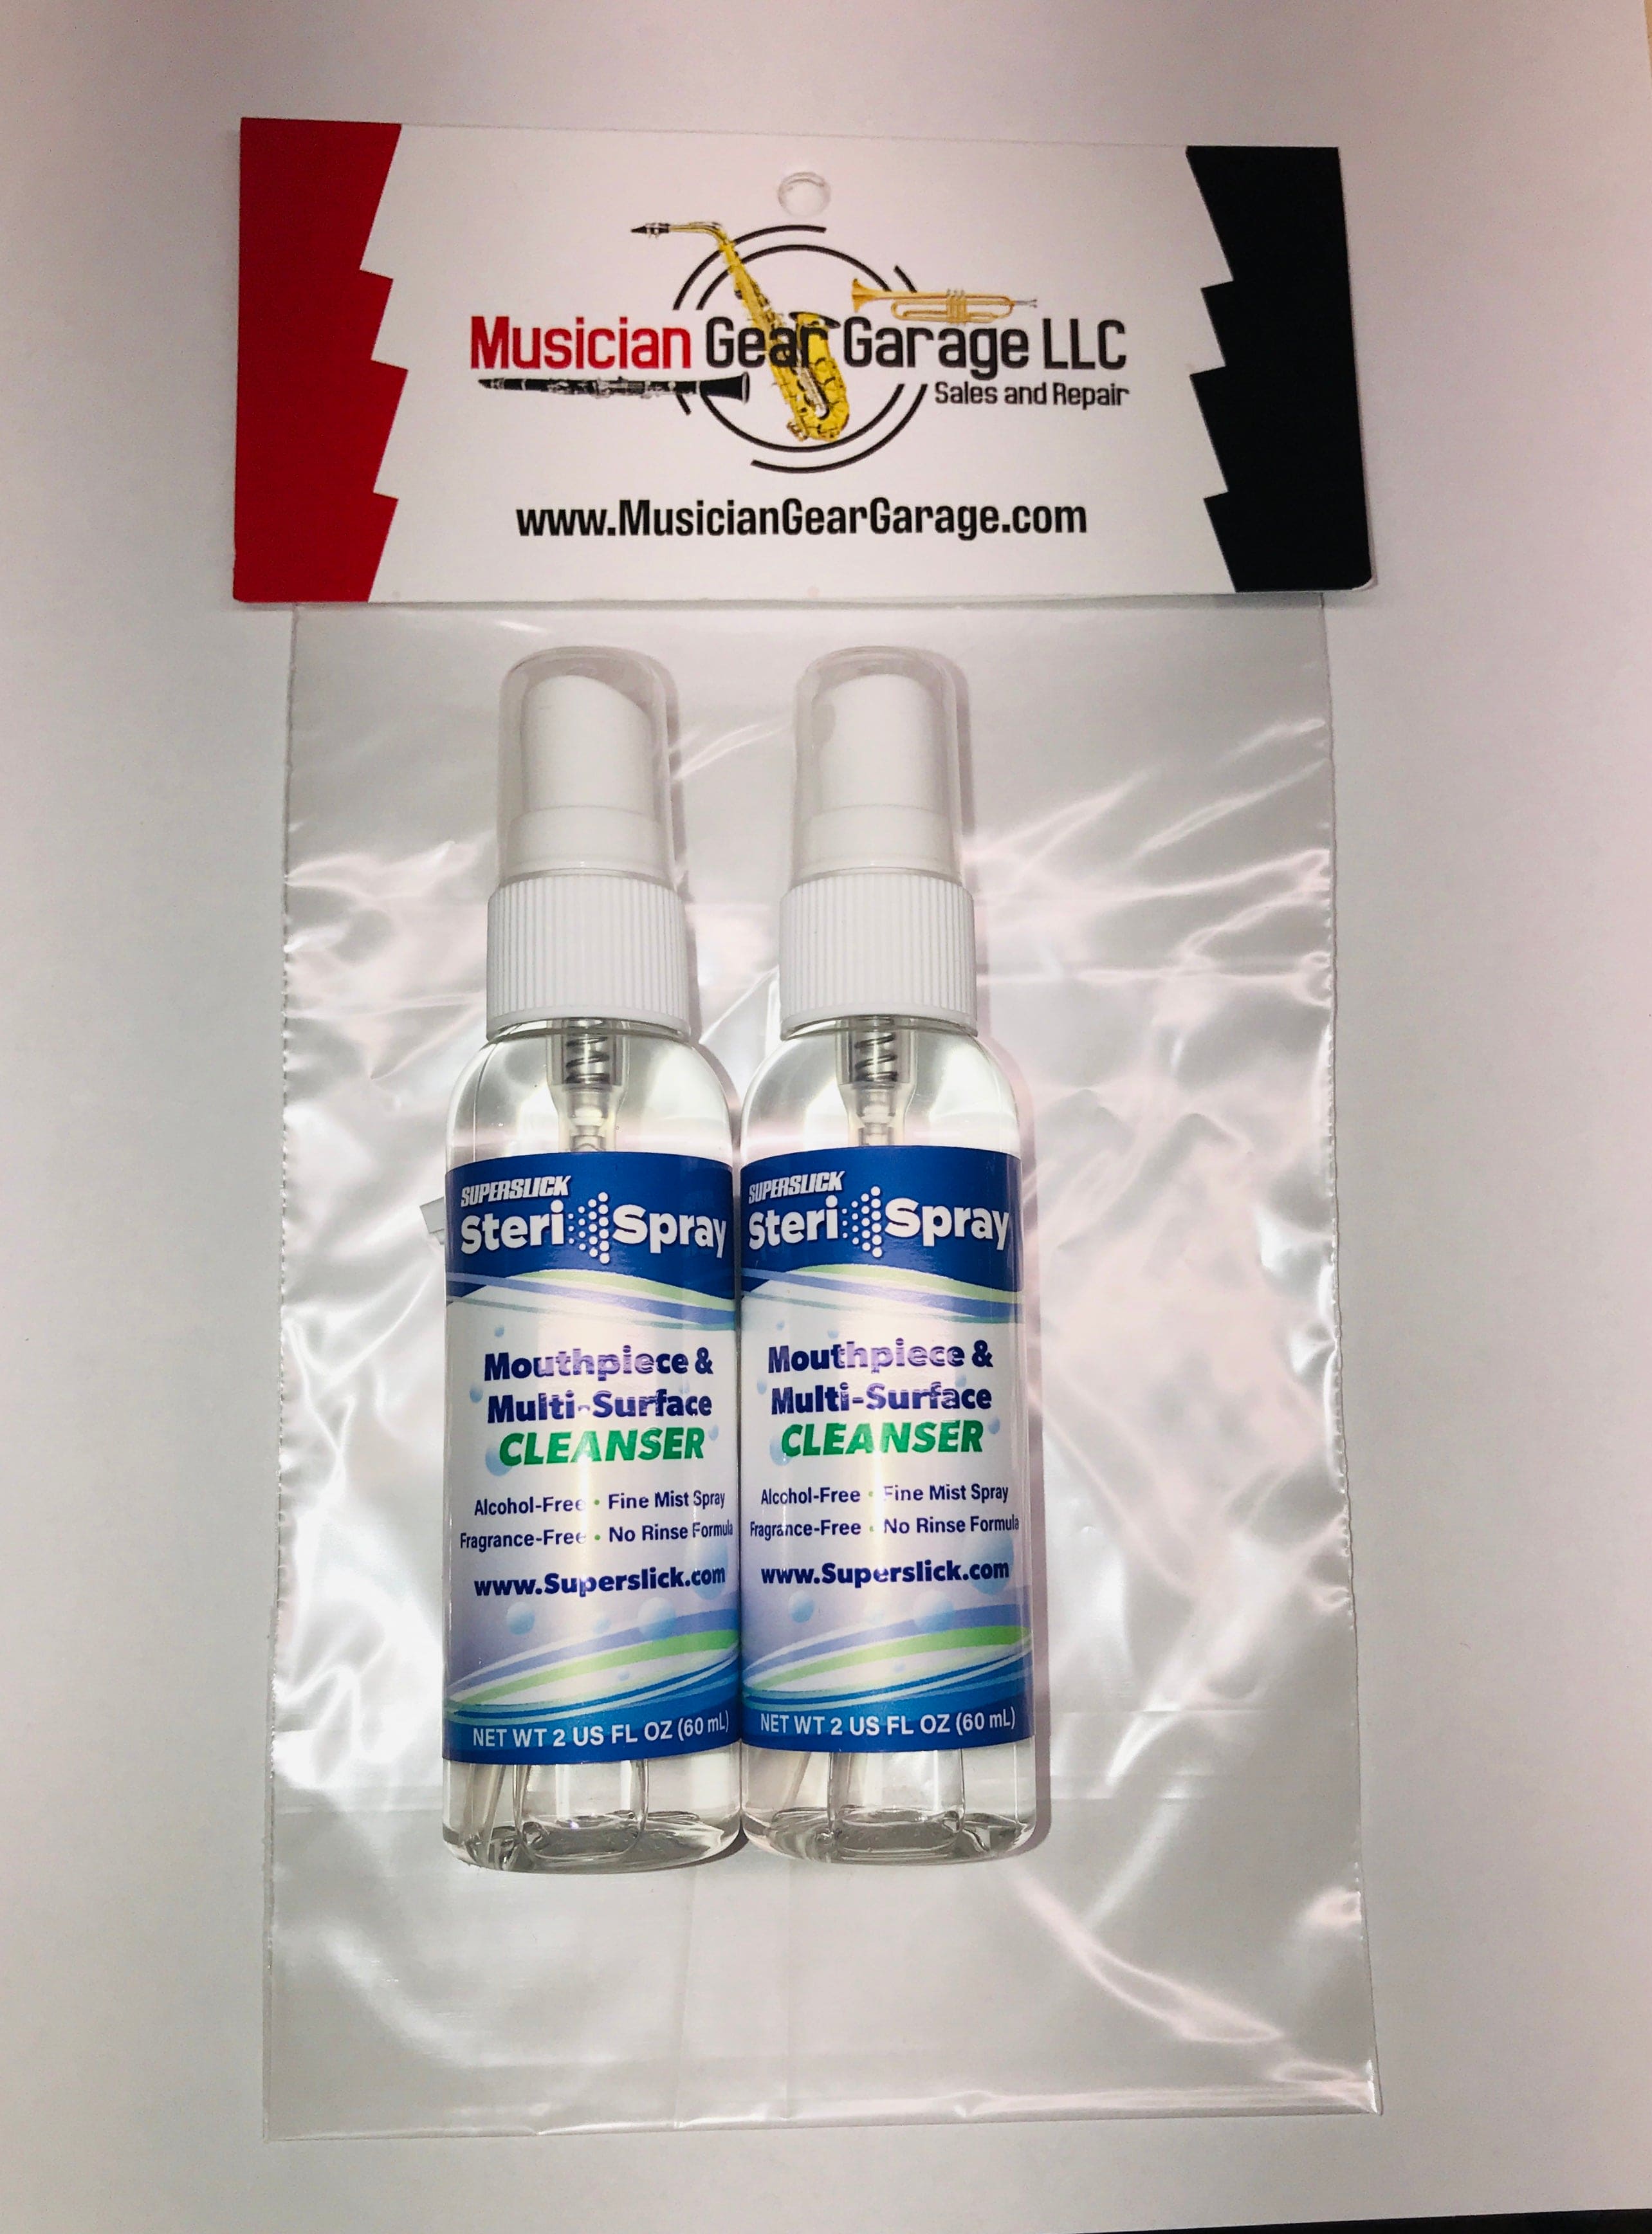 Superslick Steri-Spray Mouthpiece and Multi-Surface Cleanser Sanitizer